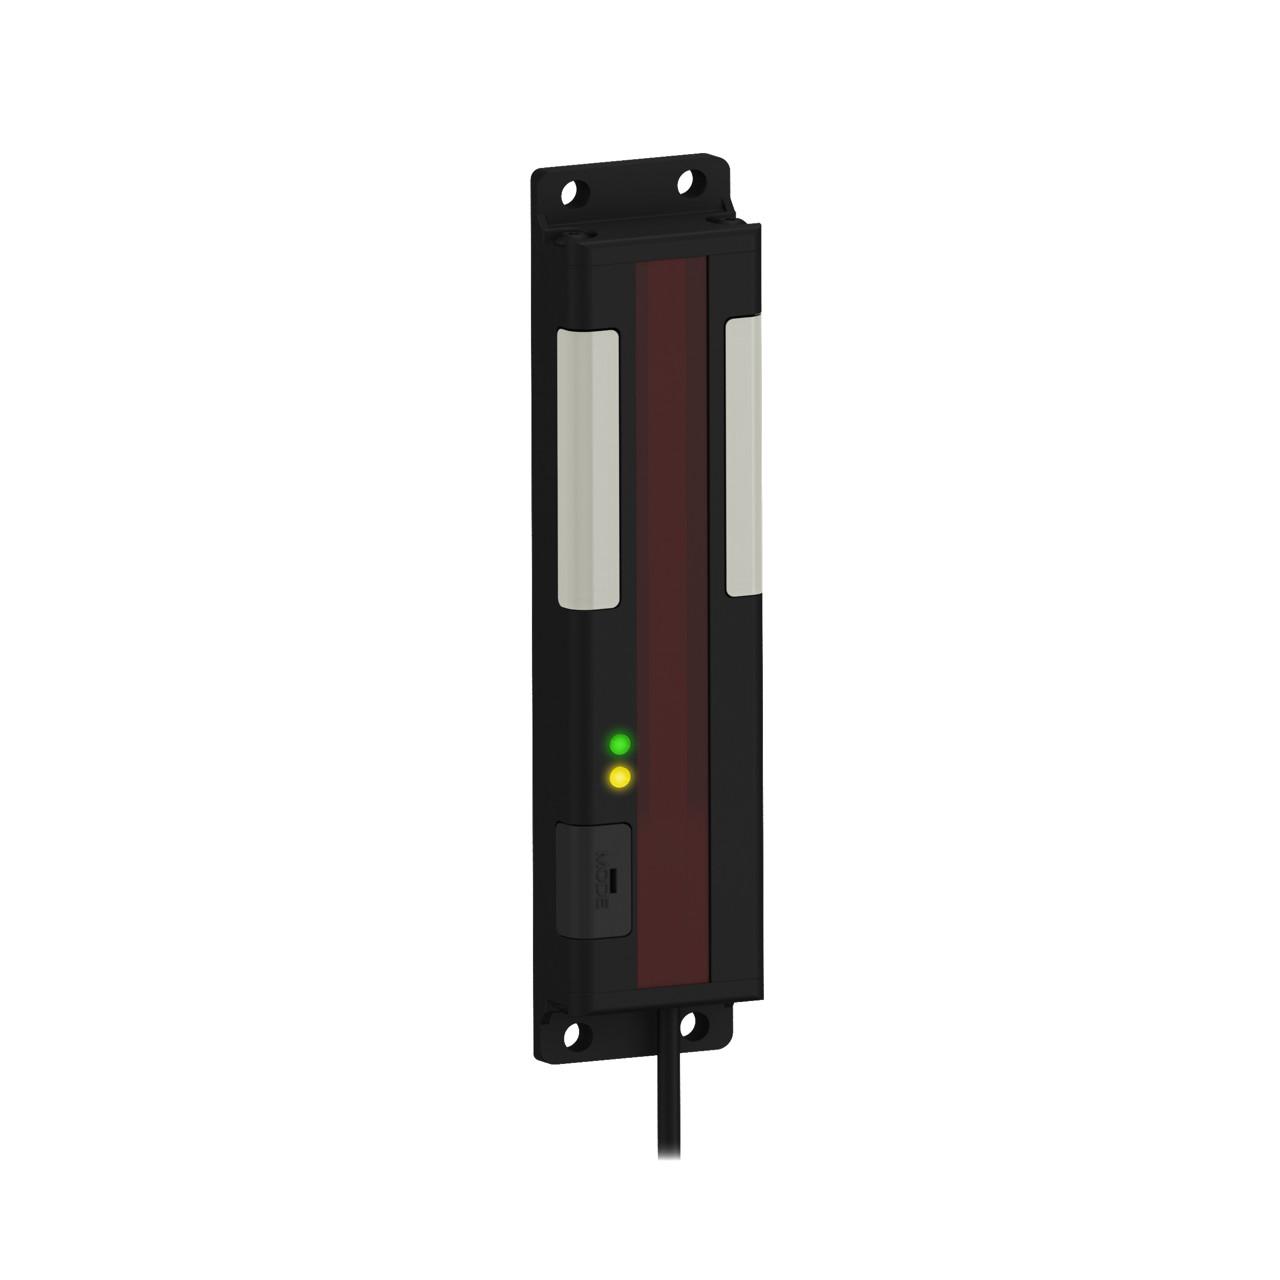 Banner PVA100N6EQ Flat-mount array optical sensor for error-proofing of bin handpicking operations - through-beam sensing emitter only - Banner Engineering (PVA) - Part #51929 - Array height 6.5" / 100mm (5 beams) - Supply voltage 12-30Vdc (12Vdc-24Vdc nom.) - Pre-wired wi